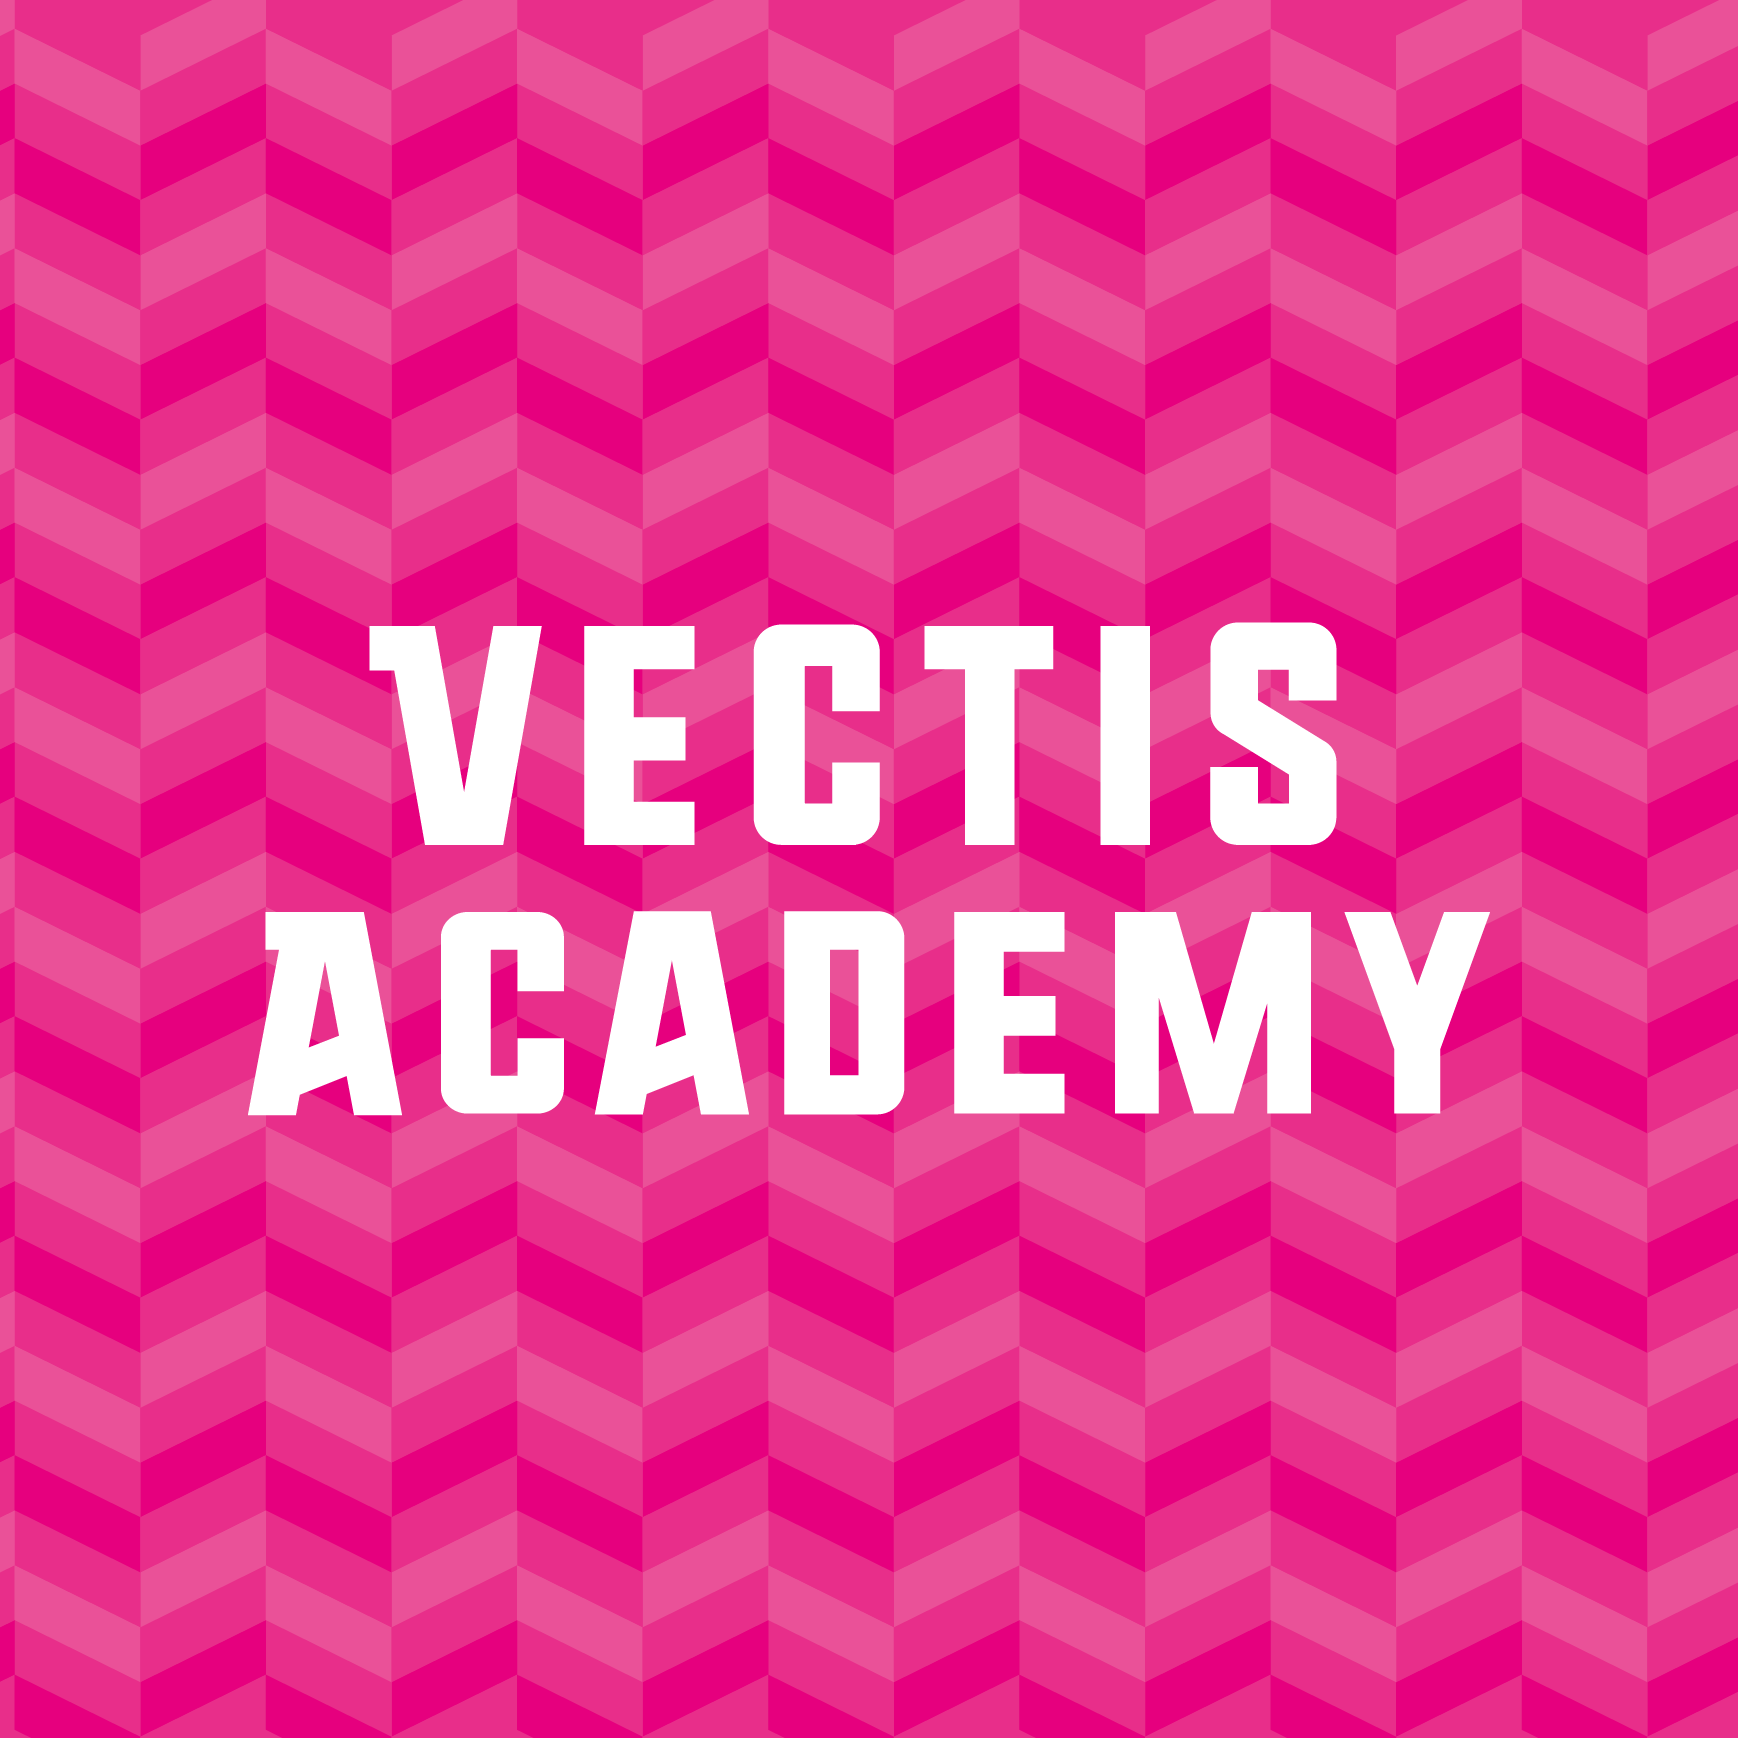 Club Image for VECTIS ACADEMY (PINK)